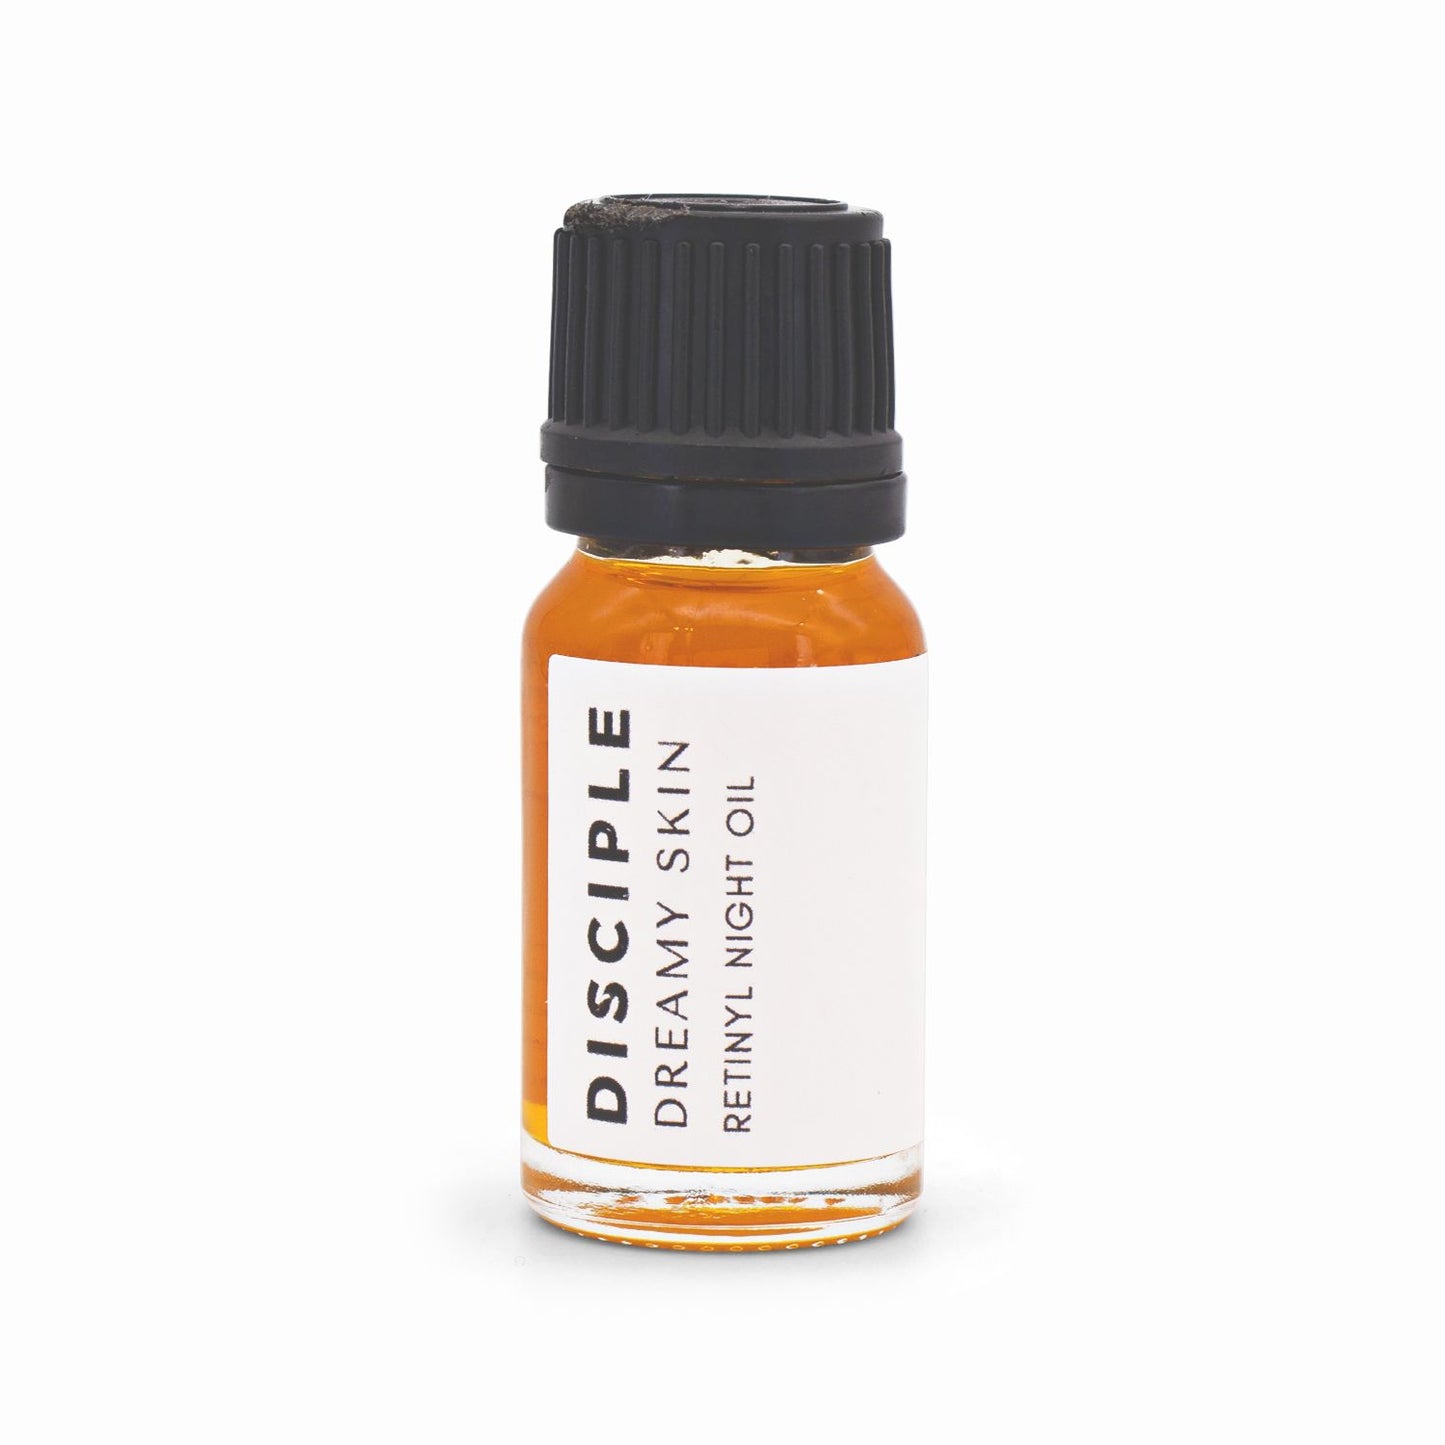 Disciple Dreamy Skin Retinyl Night Oil 10ml - Missing Box & Imperfect Container